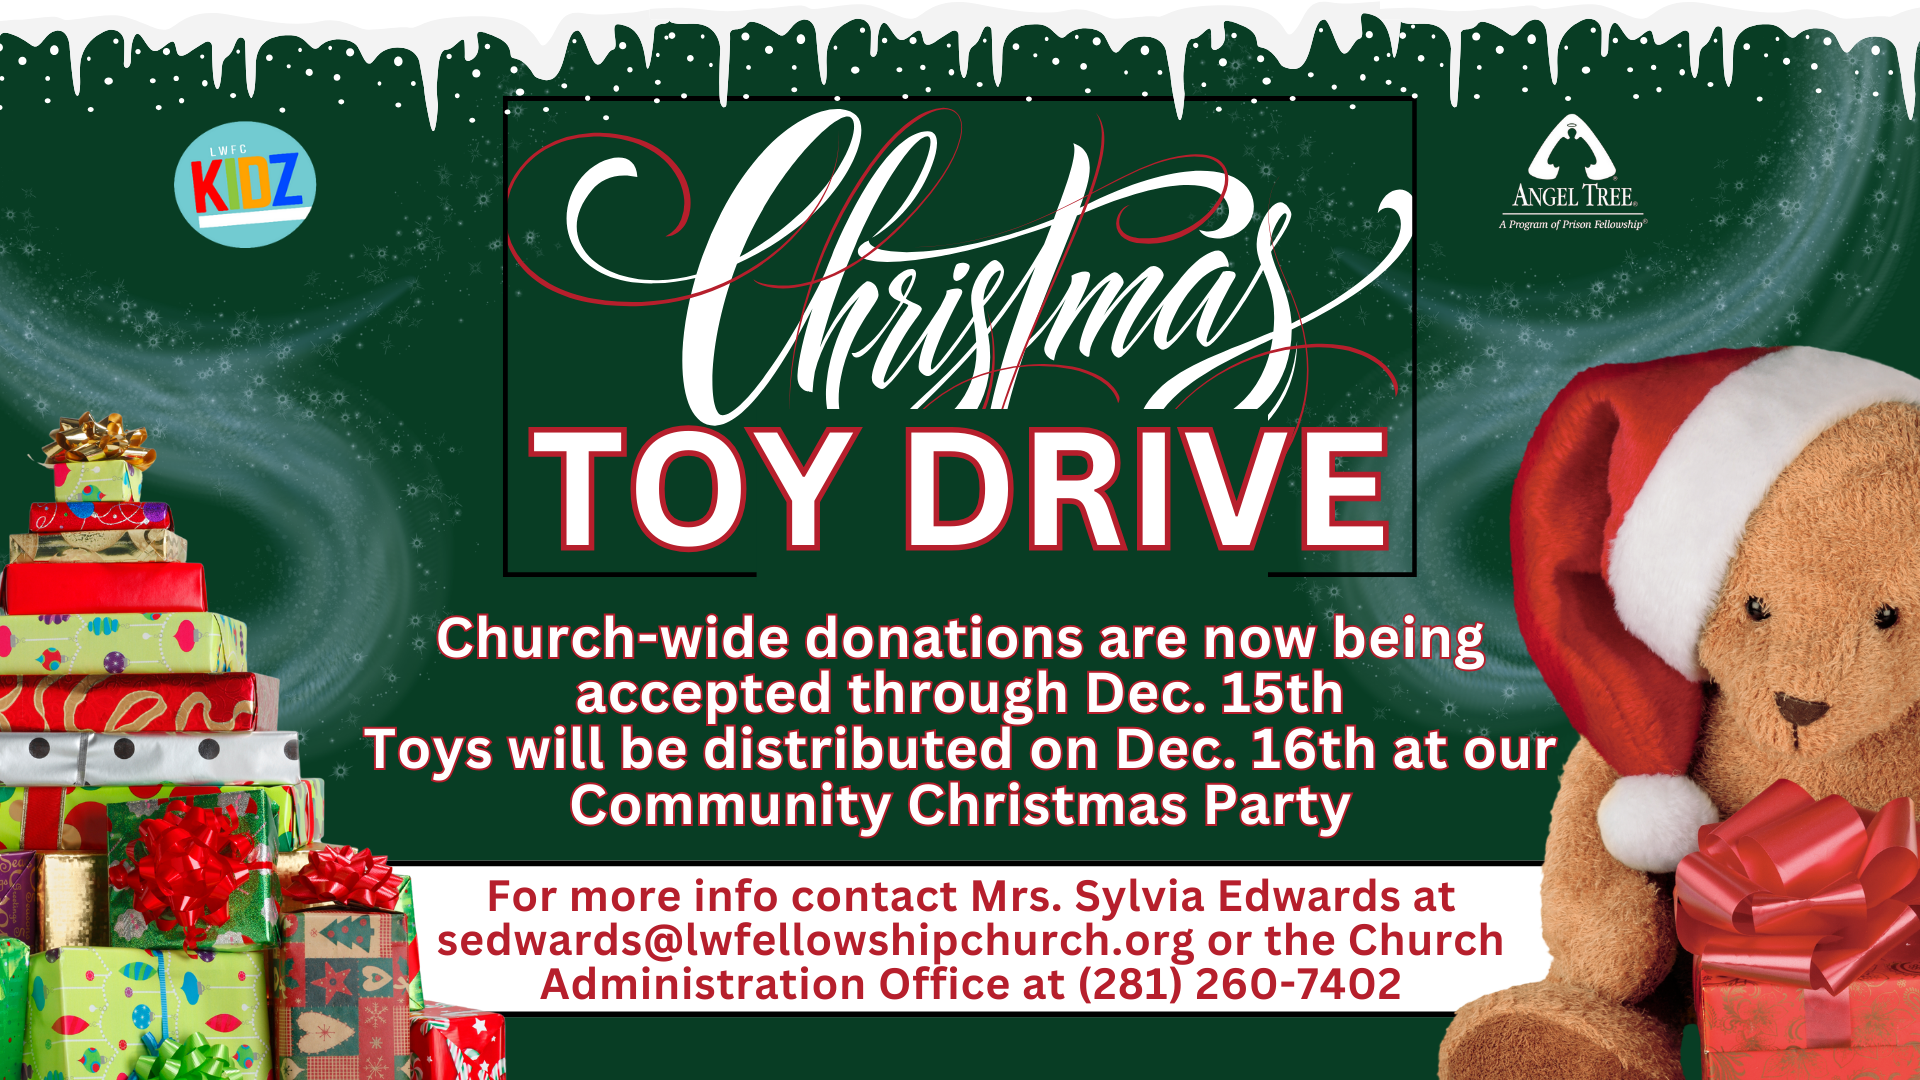 Toy Drive for LWFC Kidz Christmas Party head image